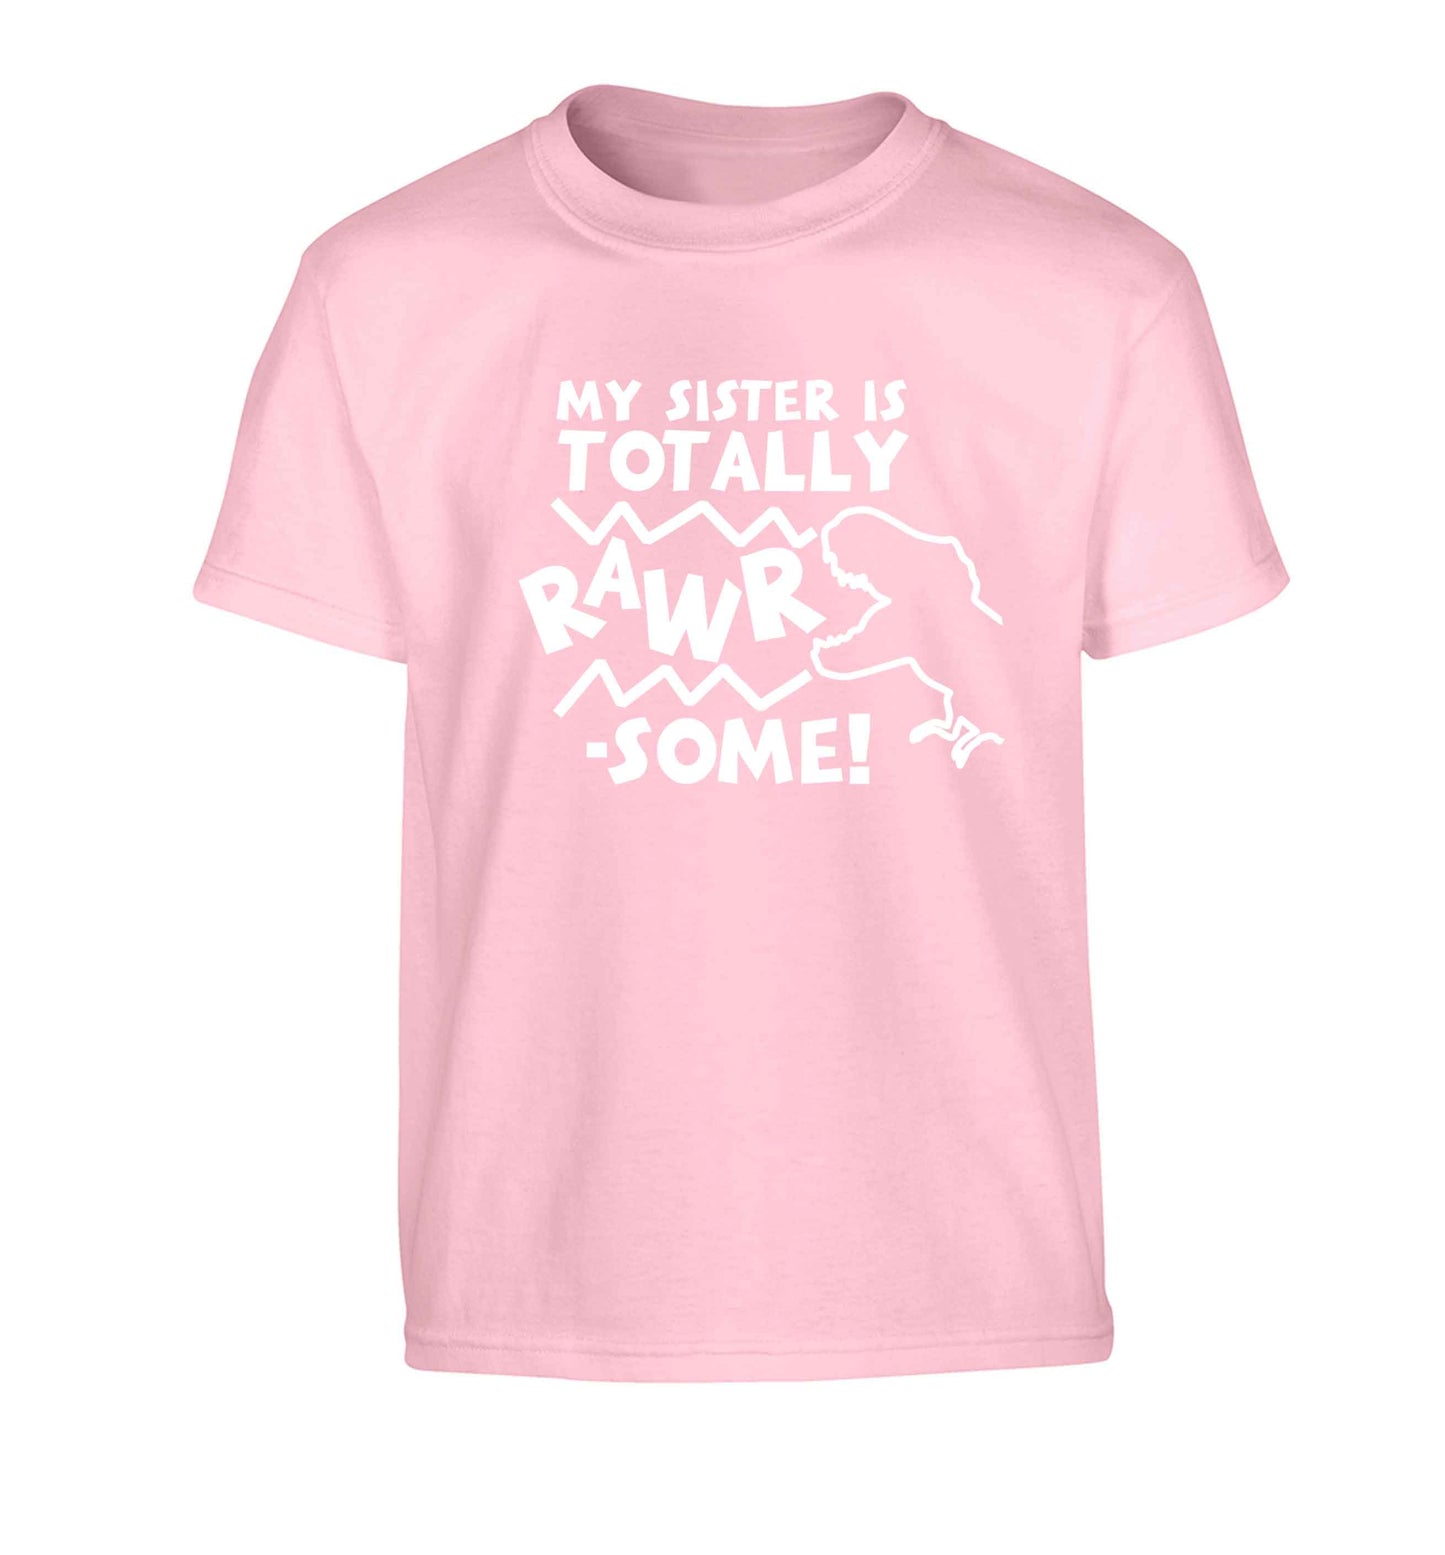 My sister is totally rawrsome Children's light pink Tshirt 12-13 Years